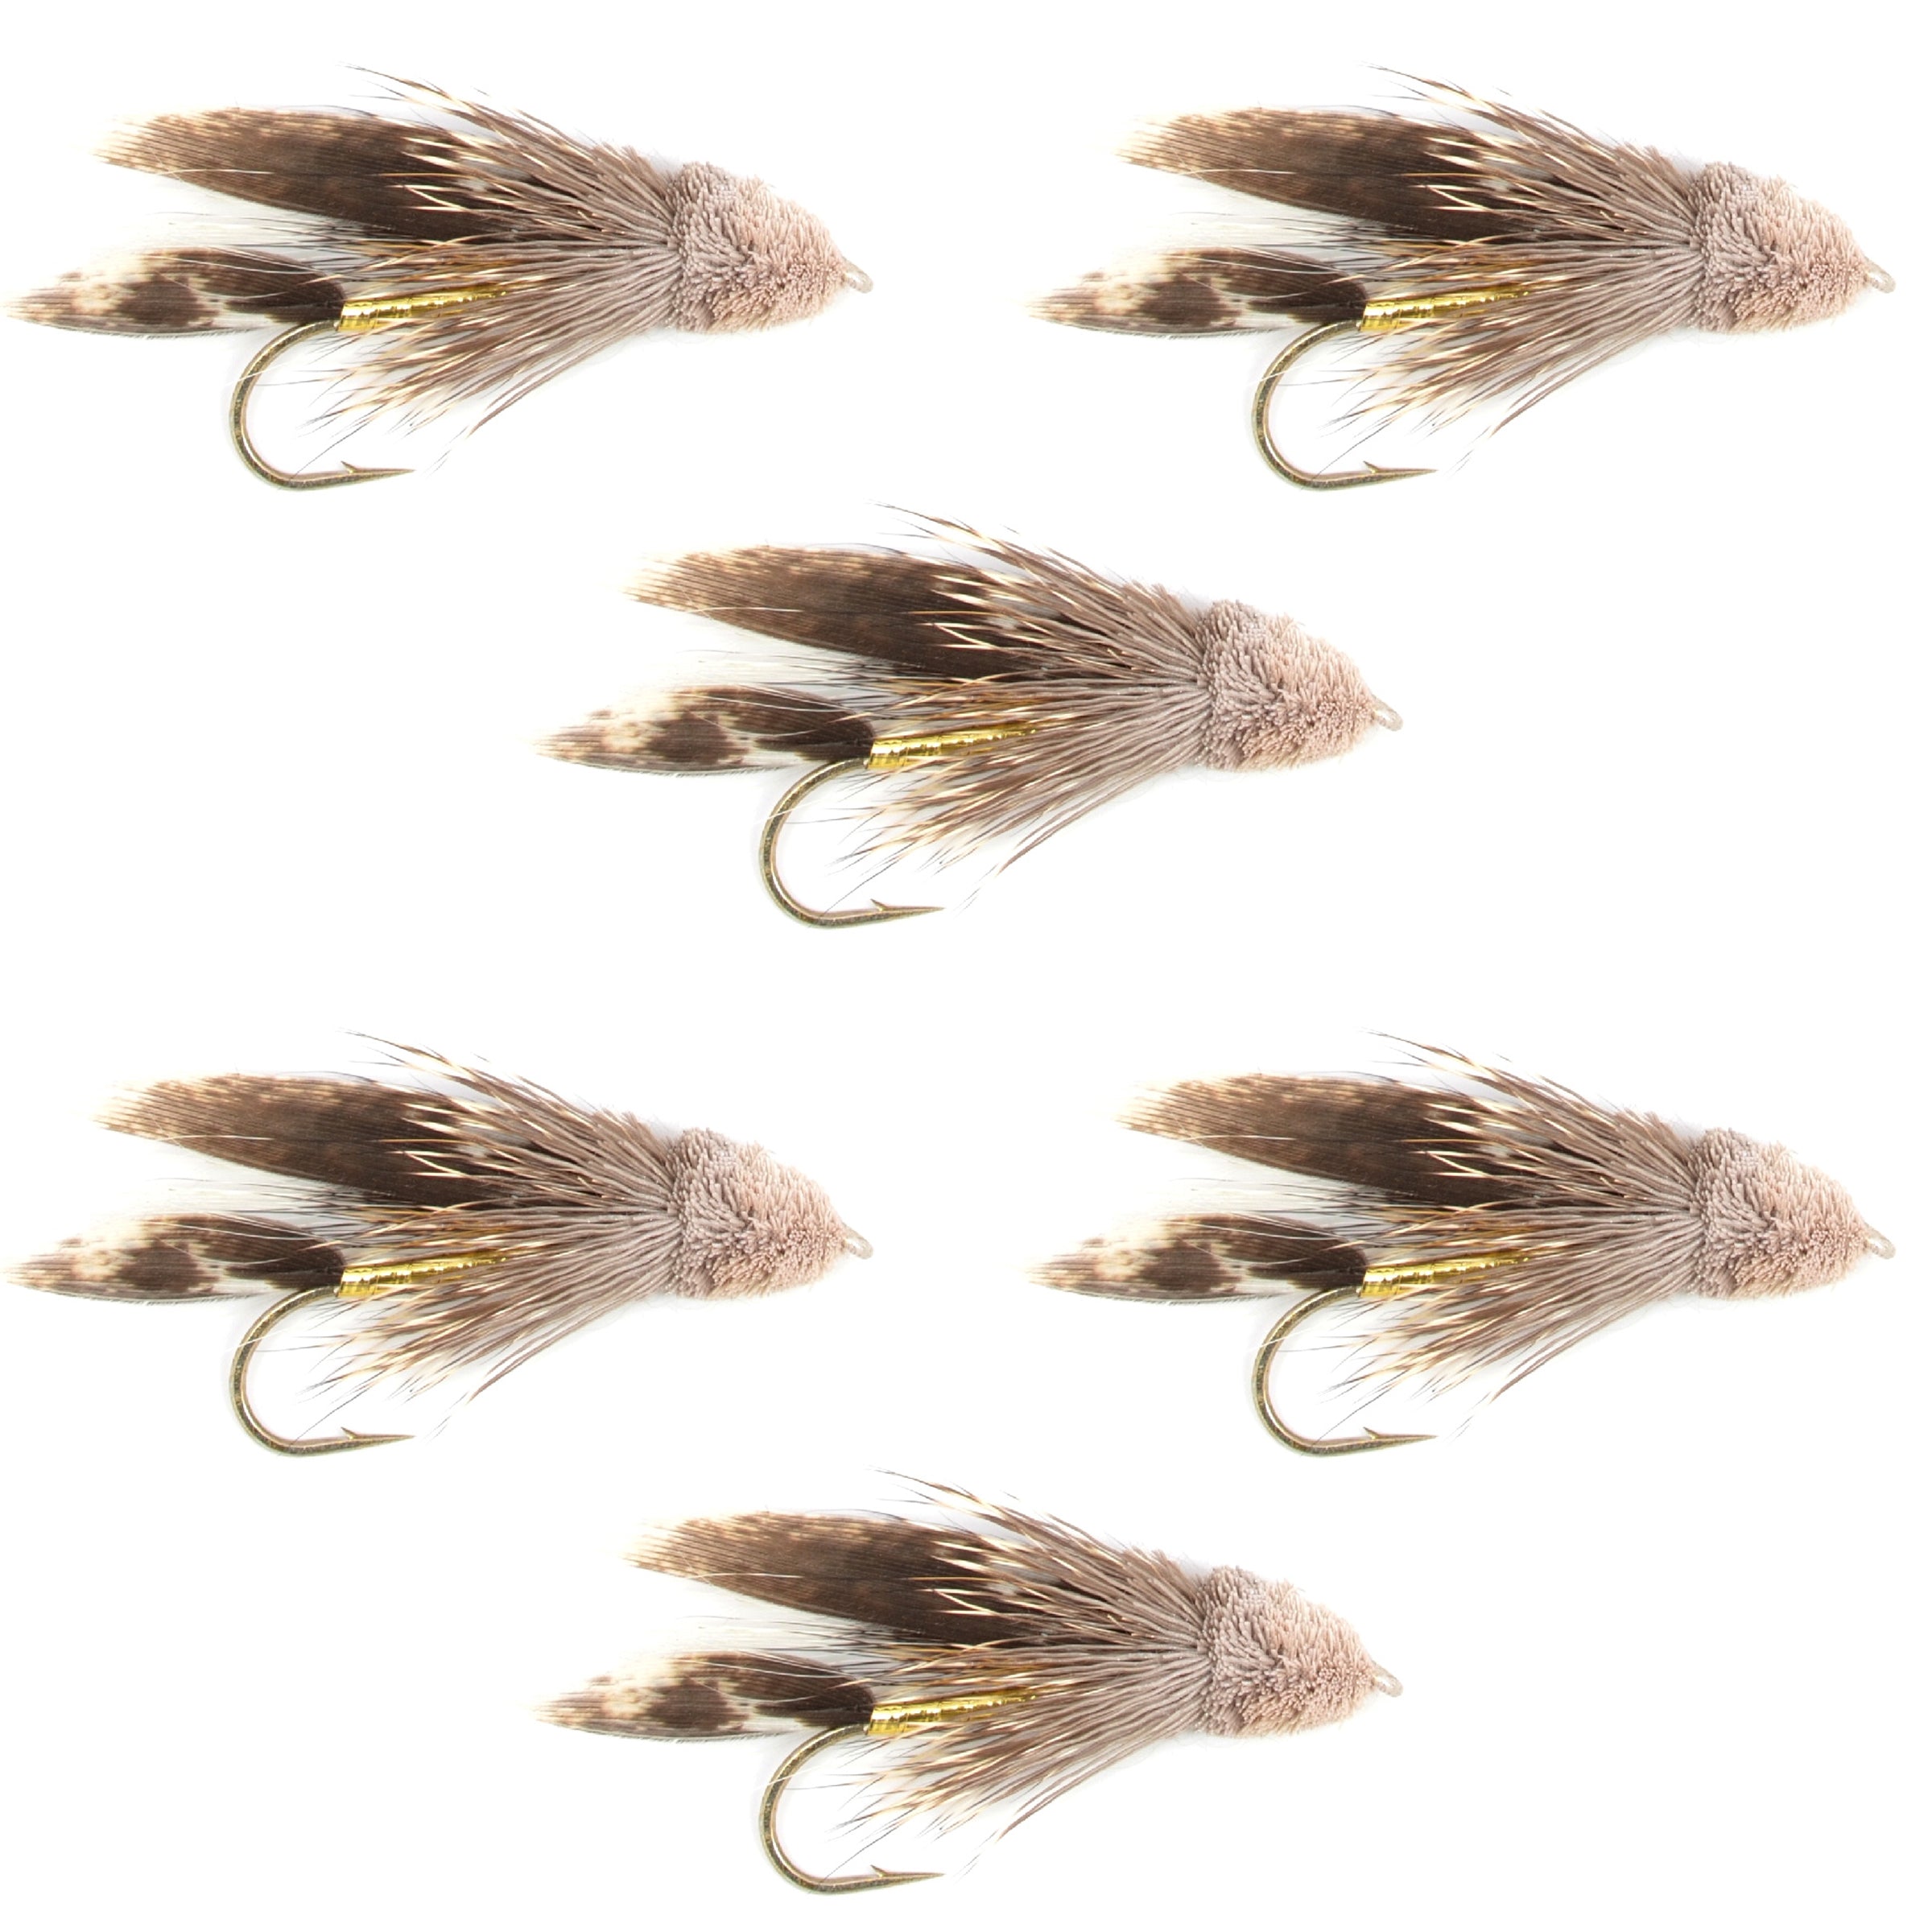 Muddler Minnow Fly Fishing Flies - Classic Bass and Trout Streamers - Set of 6 Flies Hook Size 10